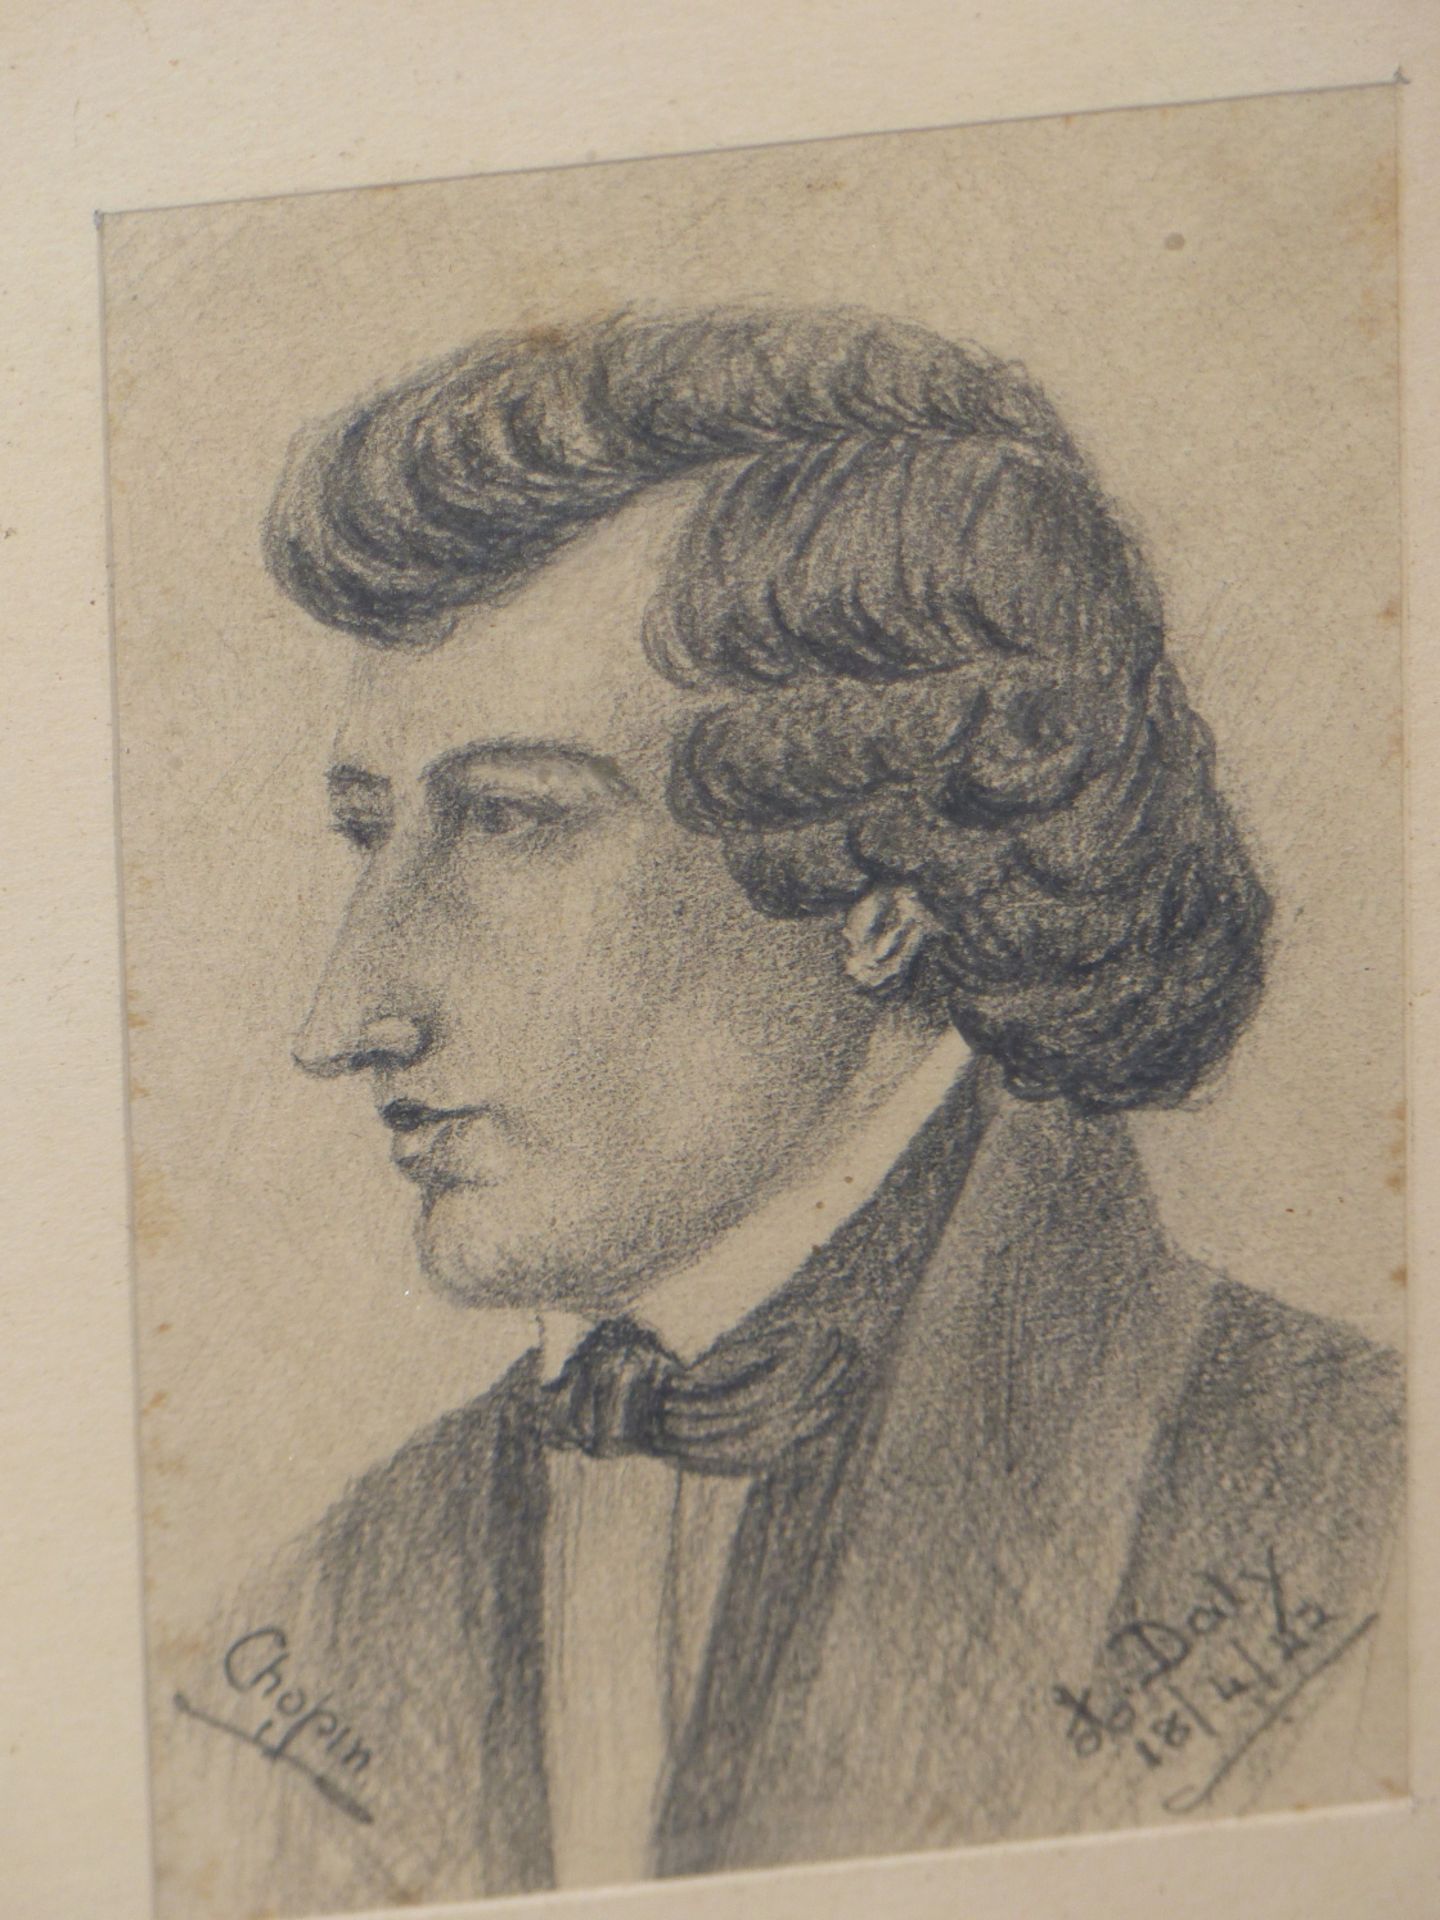 A. DALY (MID 20TH CENTURY) PORTRAIT STUDIES OF MUSICIANS, WAGNER, VERDI, CHOPIN, ROSSINI, PENCIL - Image 5 of 7